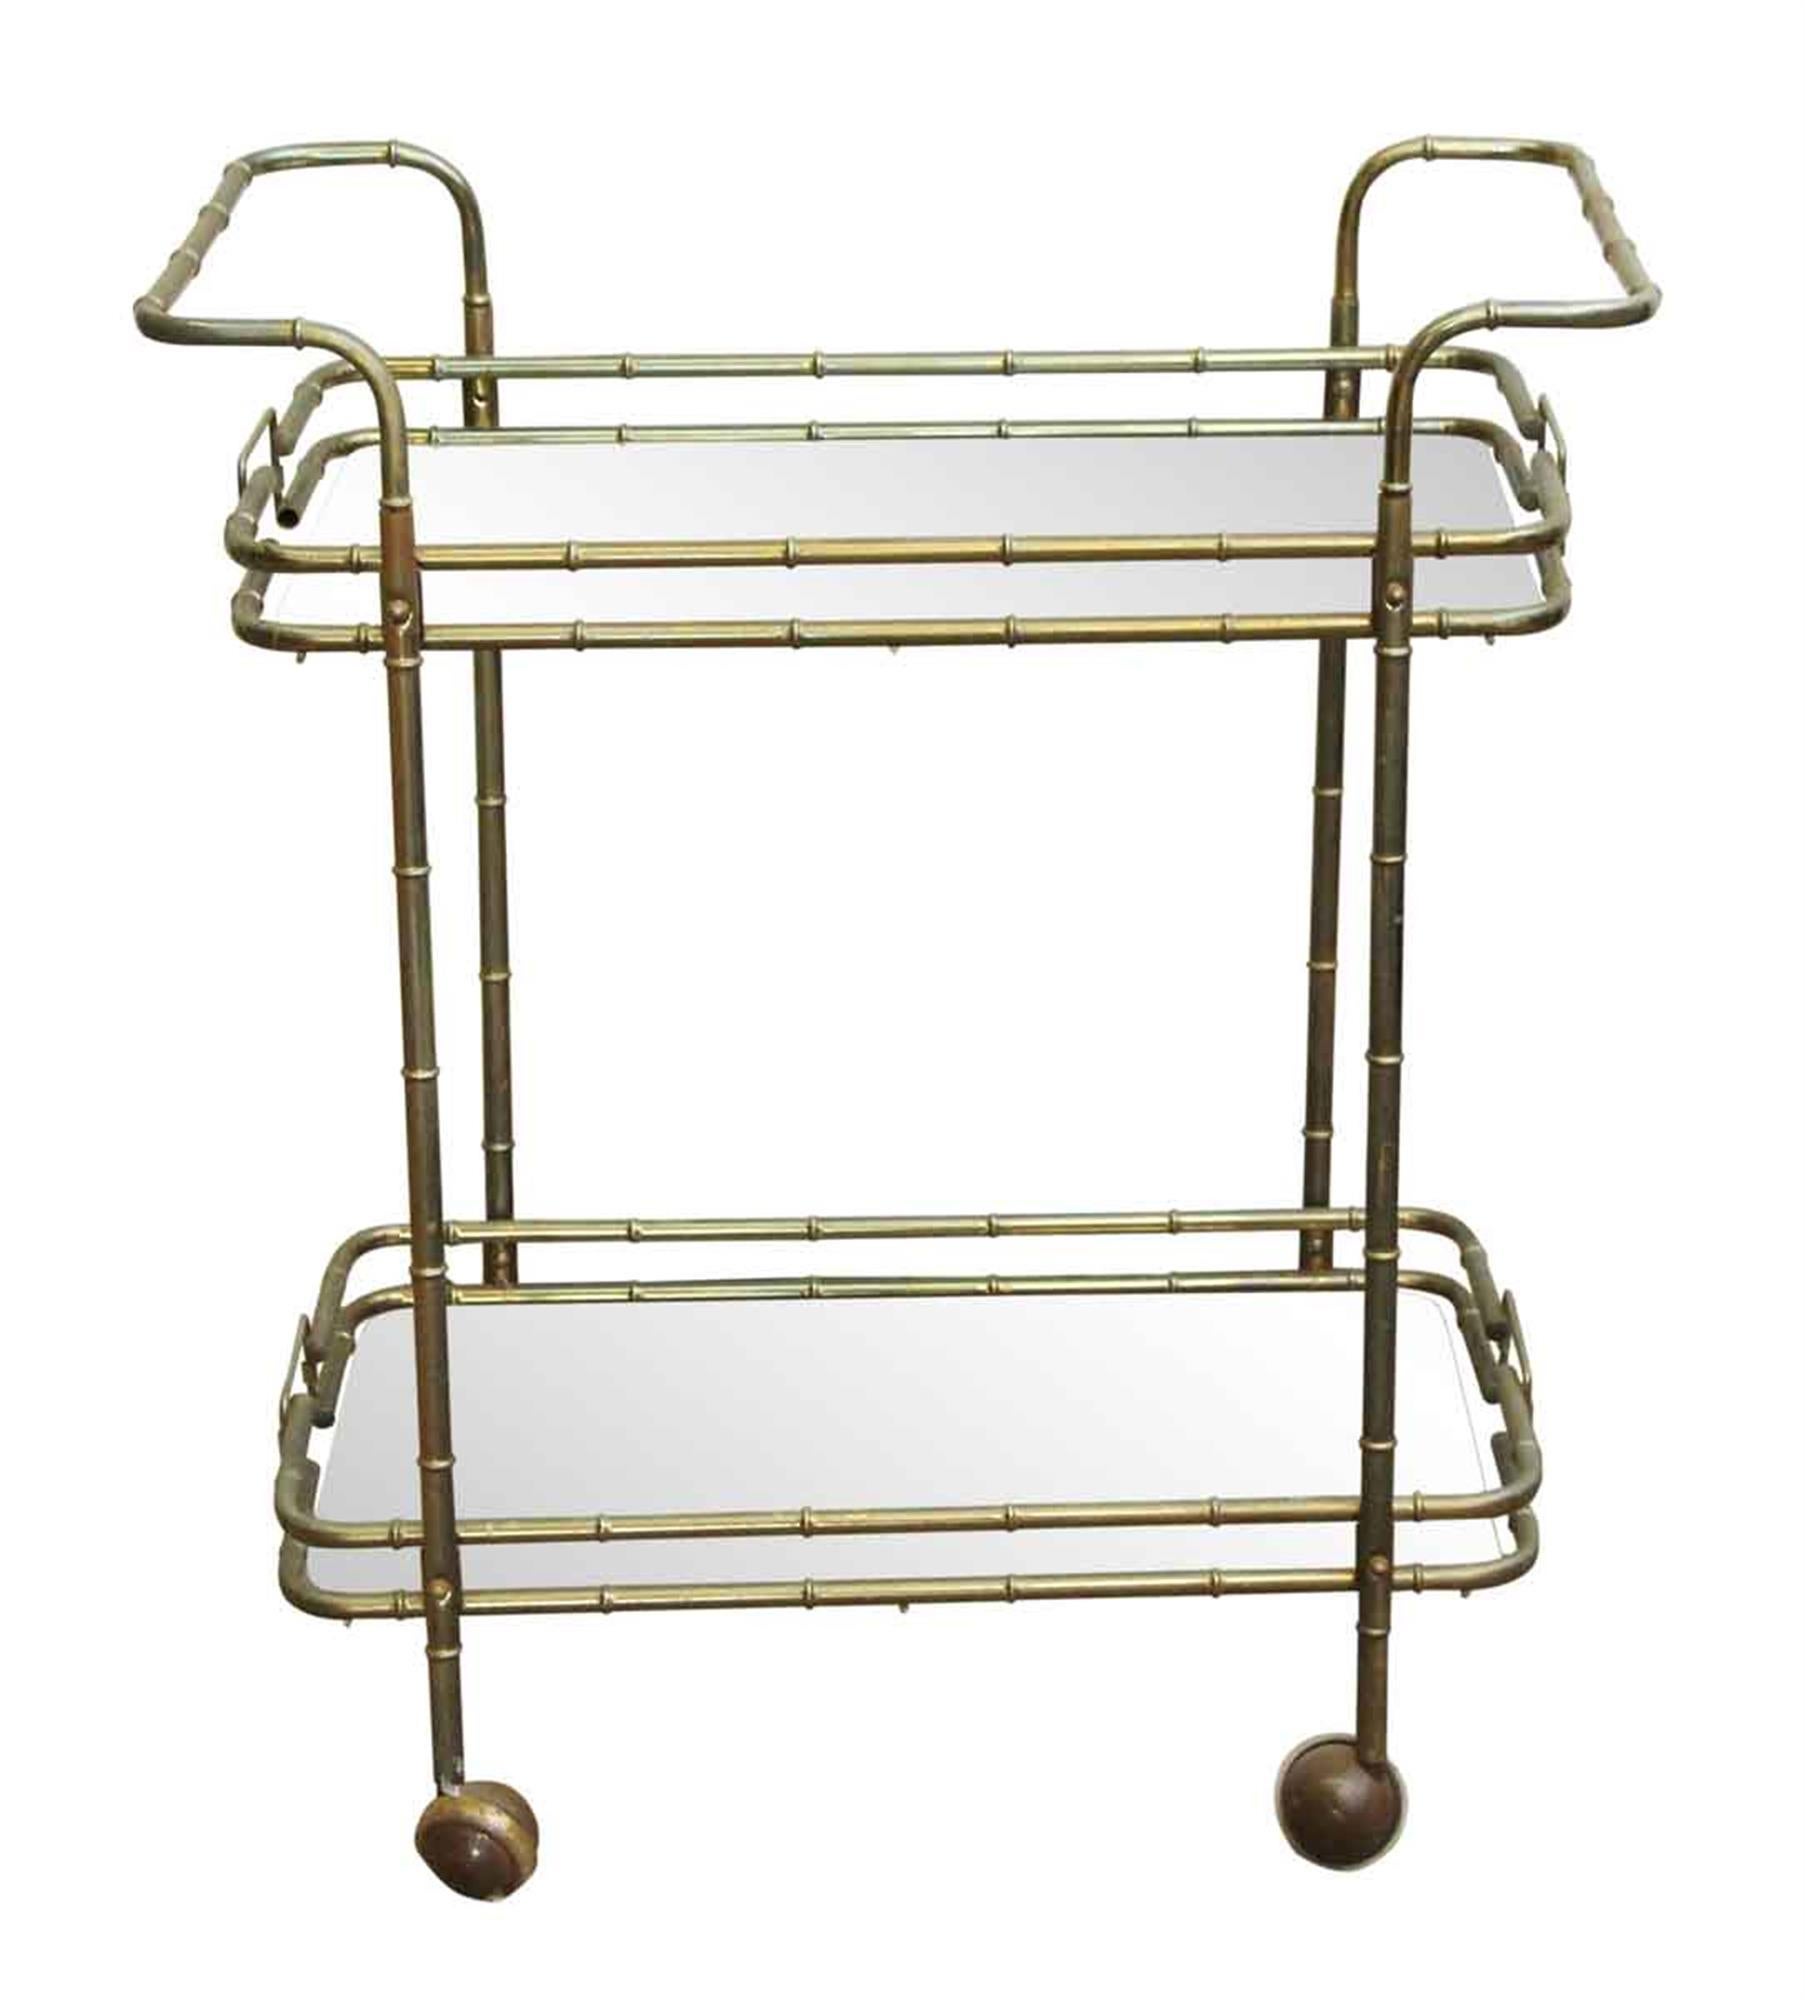 1970s French bar cart with a bamboo like appearance and glass shelves done in a Mid-Century Modern styling. This can be seen at our 5 East 16th St location on Union Square in Manhattan.